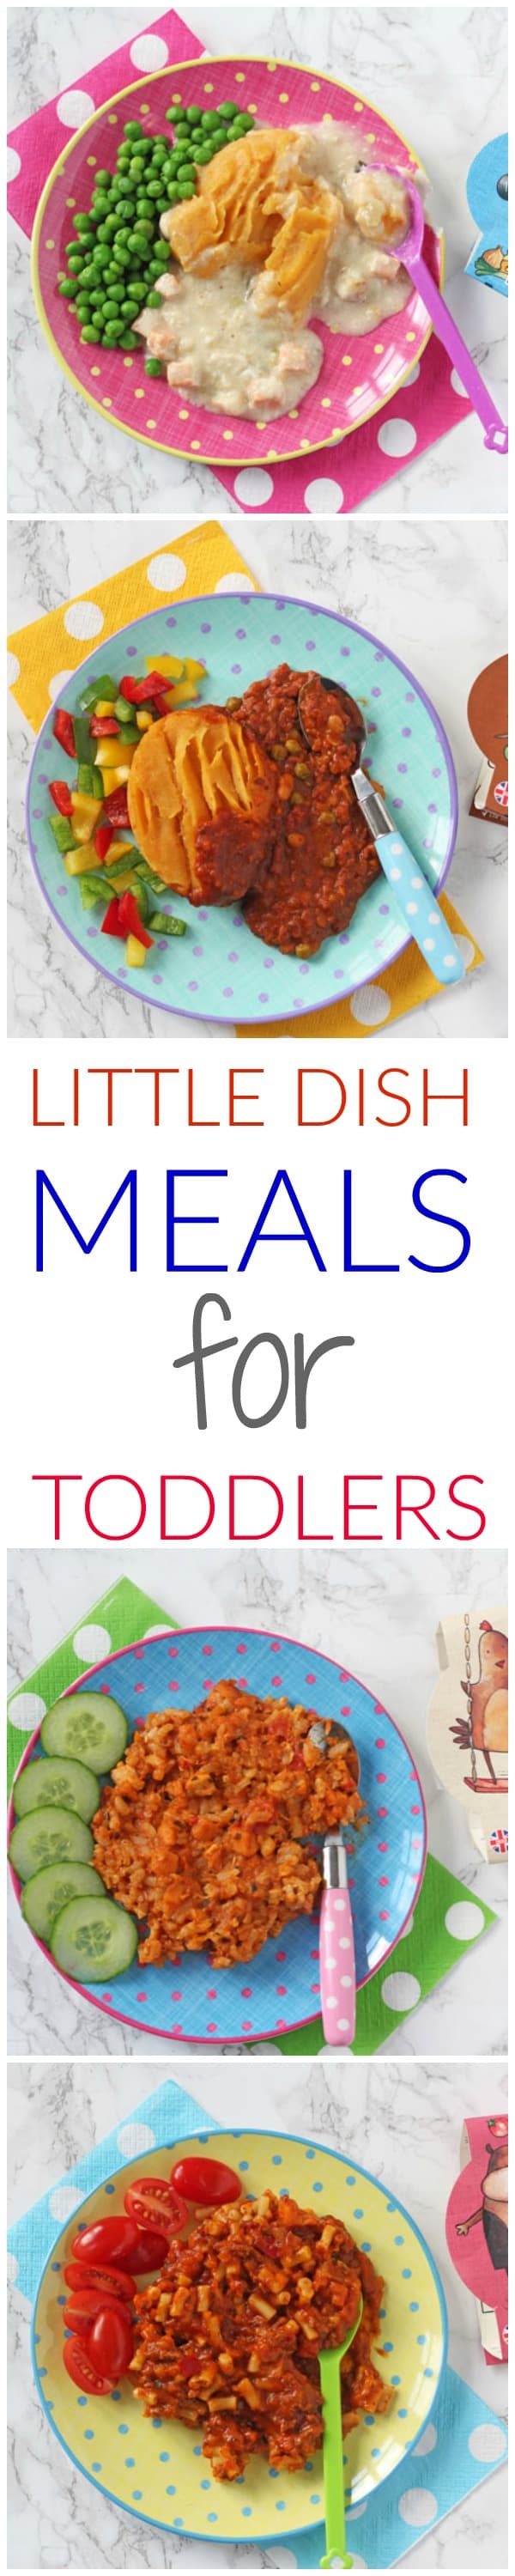 Little Dish pots and pies - delicious and nutritionally balanced meals for toddlers!